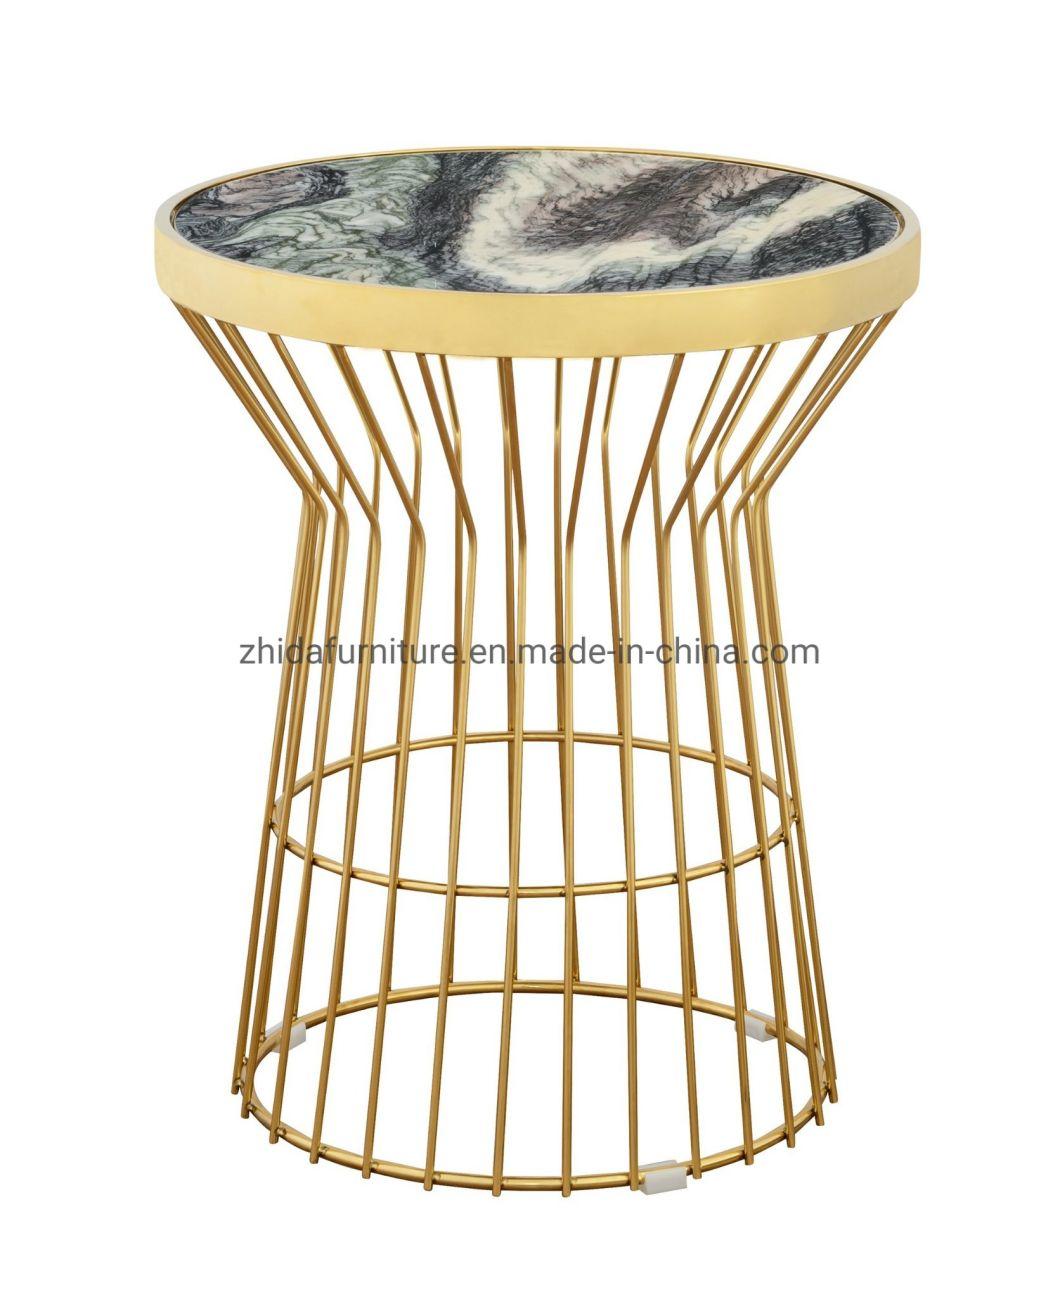 Luxury Style Golden Color Marble Top Living Room Side Coffee Table